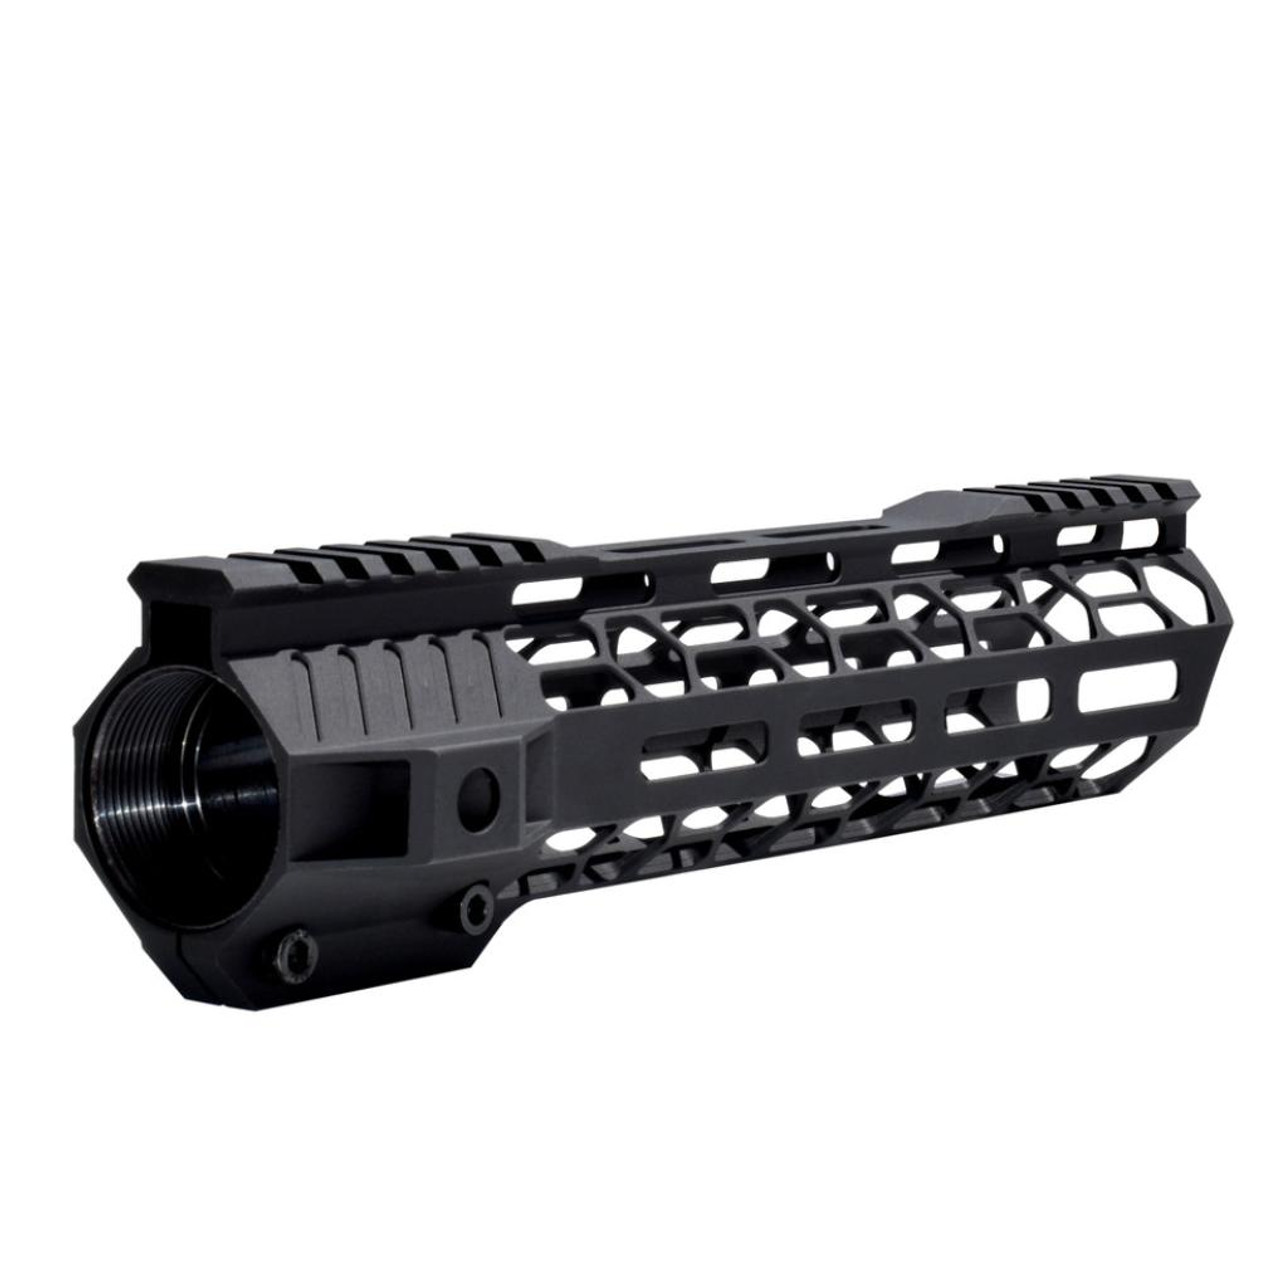 MCS 10" Super Light Free Float M-LOK Handguard with Partial Top Rail, LR 308 DMPS High Profile Made in the USA 